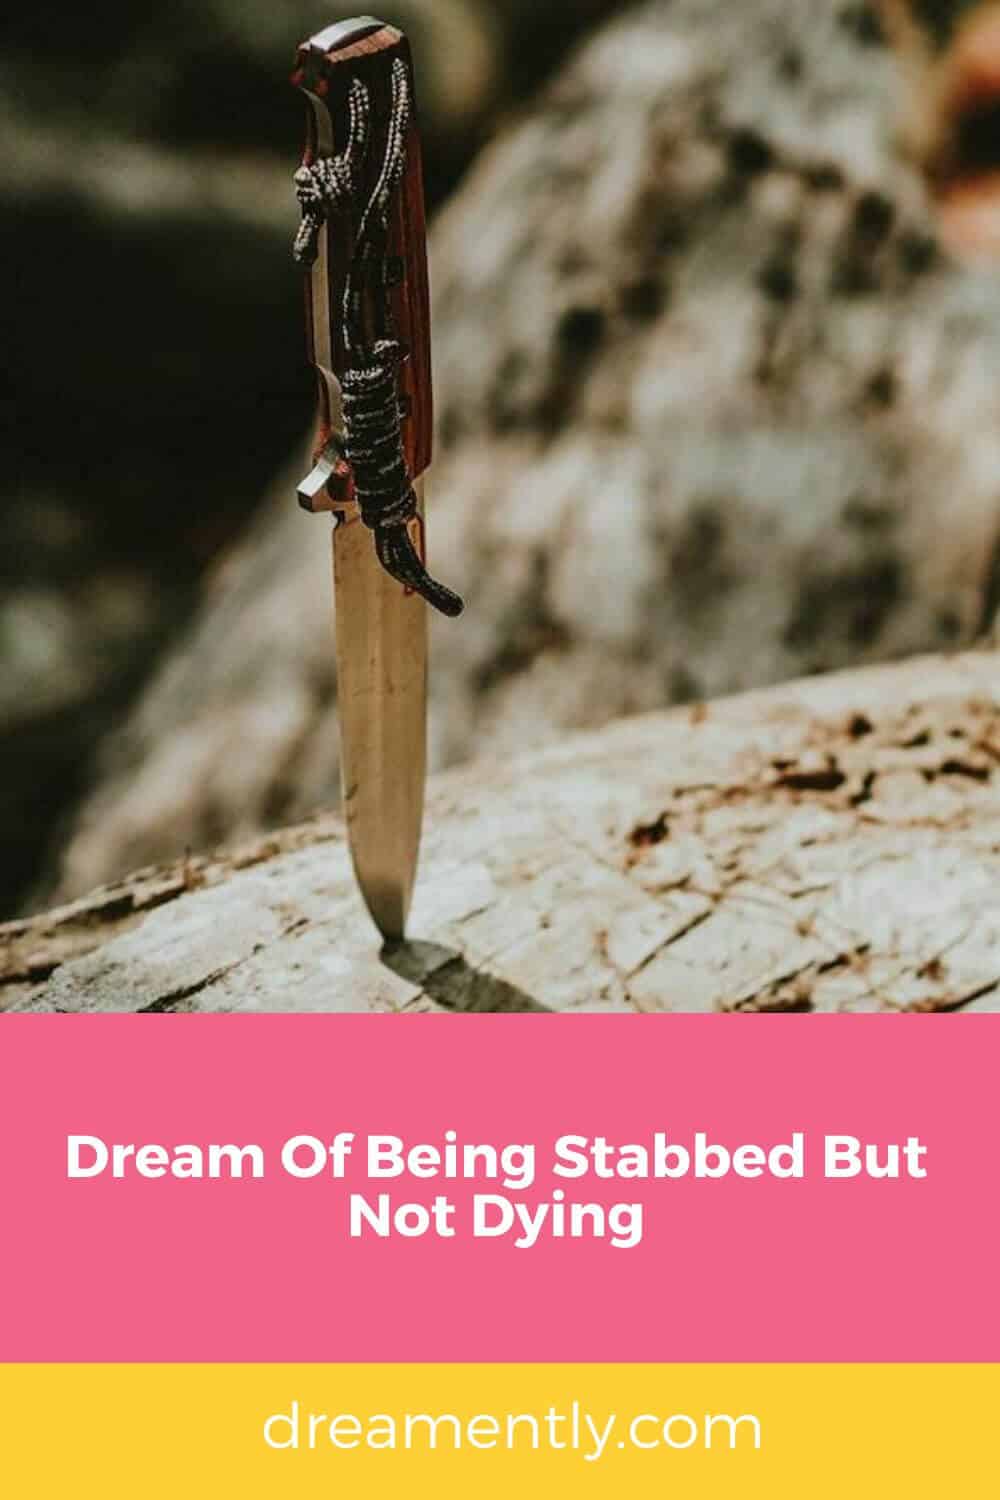 Dream Of Being Stabbed But Not Dying (2)